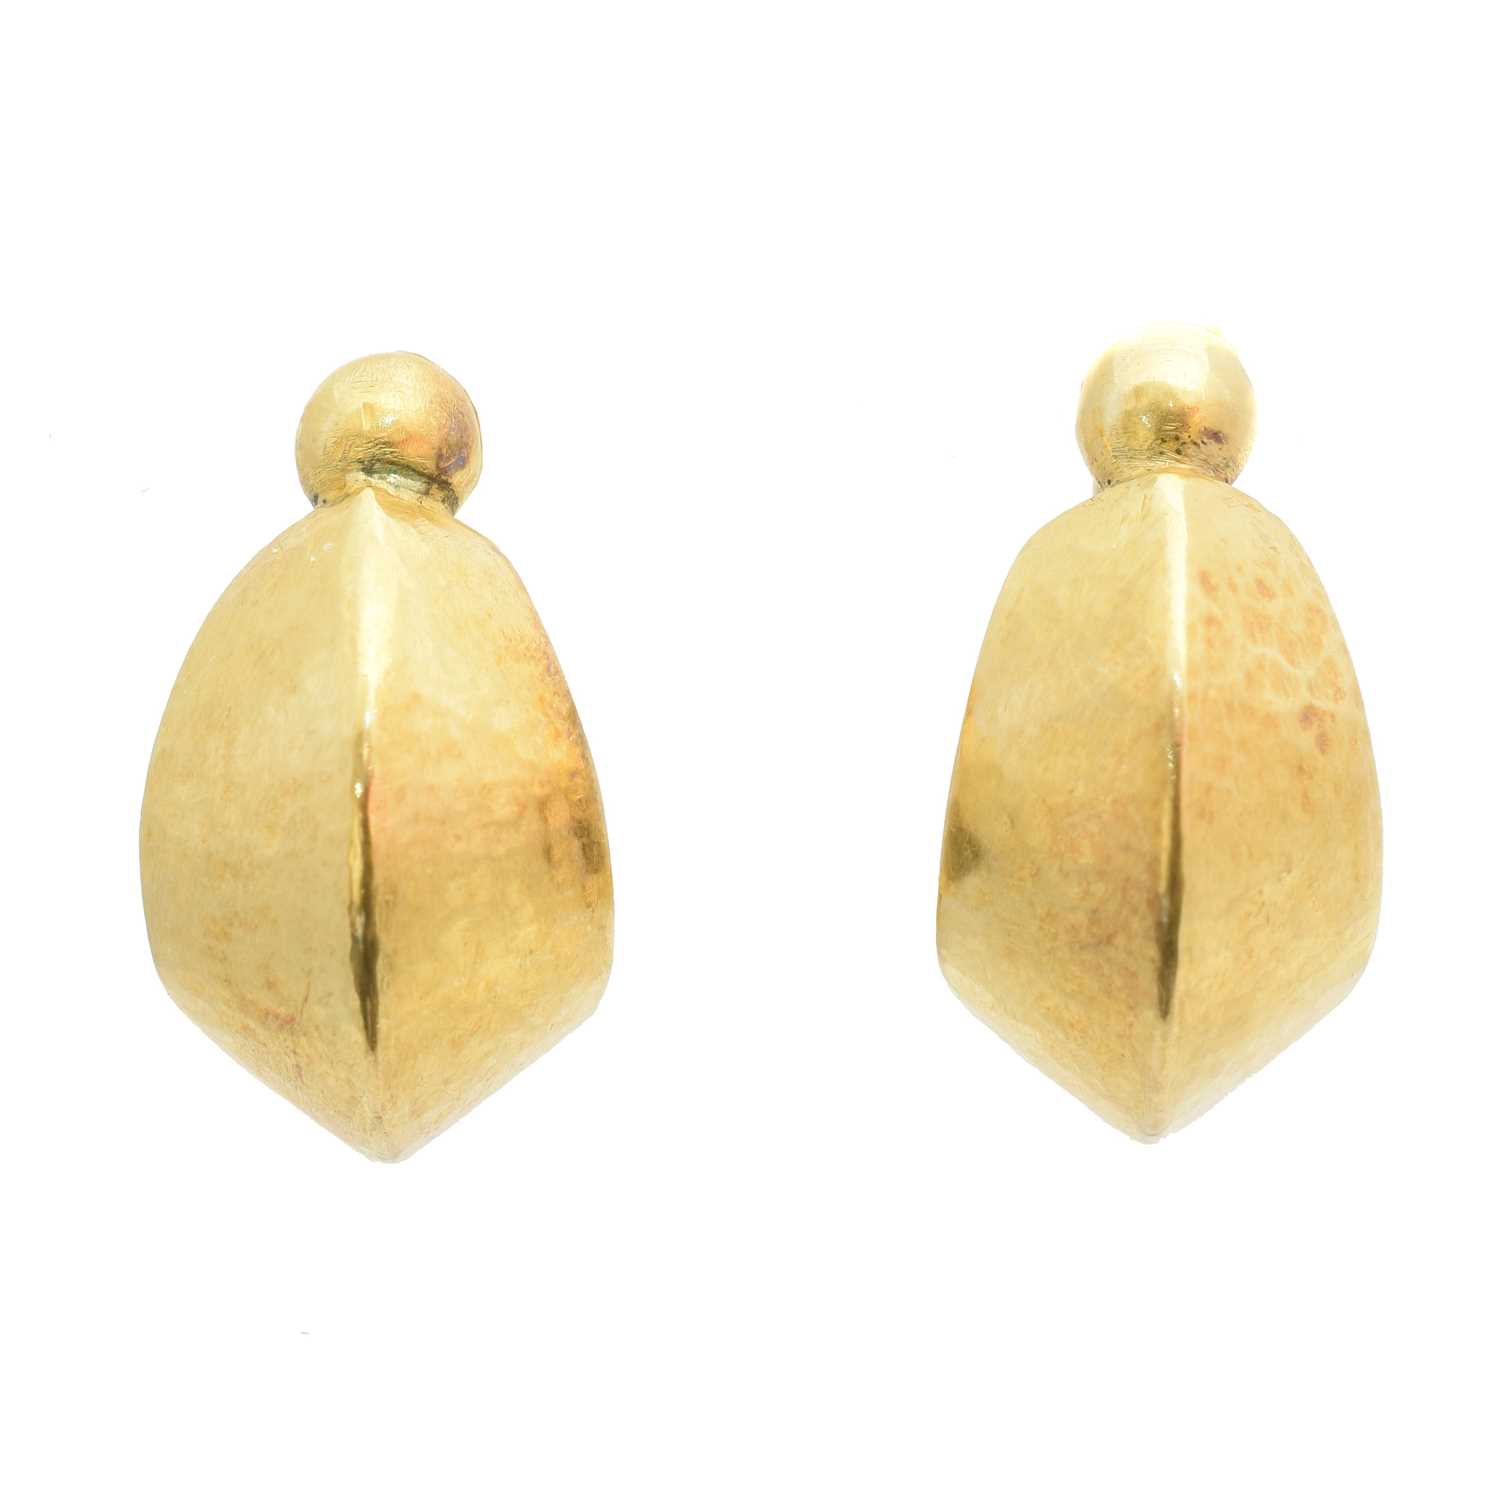 Lot 81 - A pair of earrings by Ilias Lalaounis